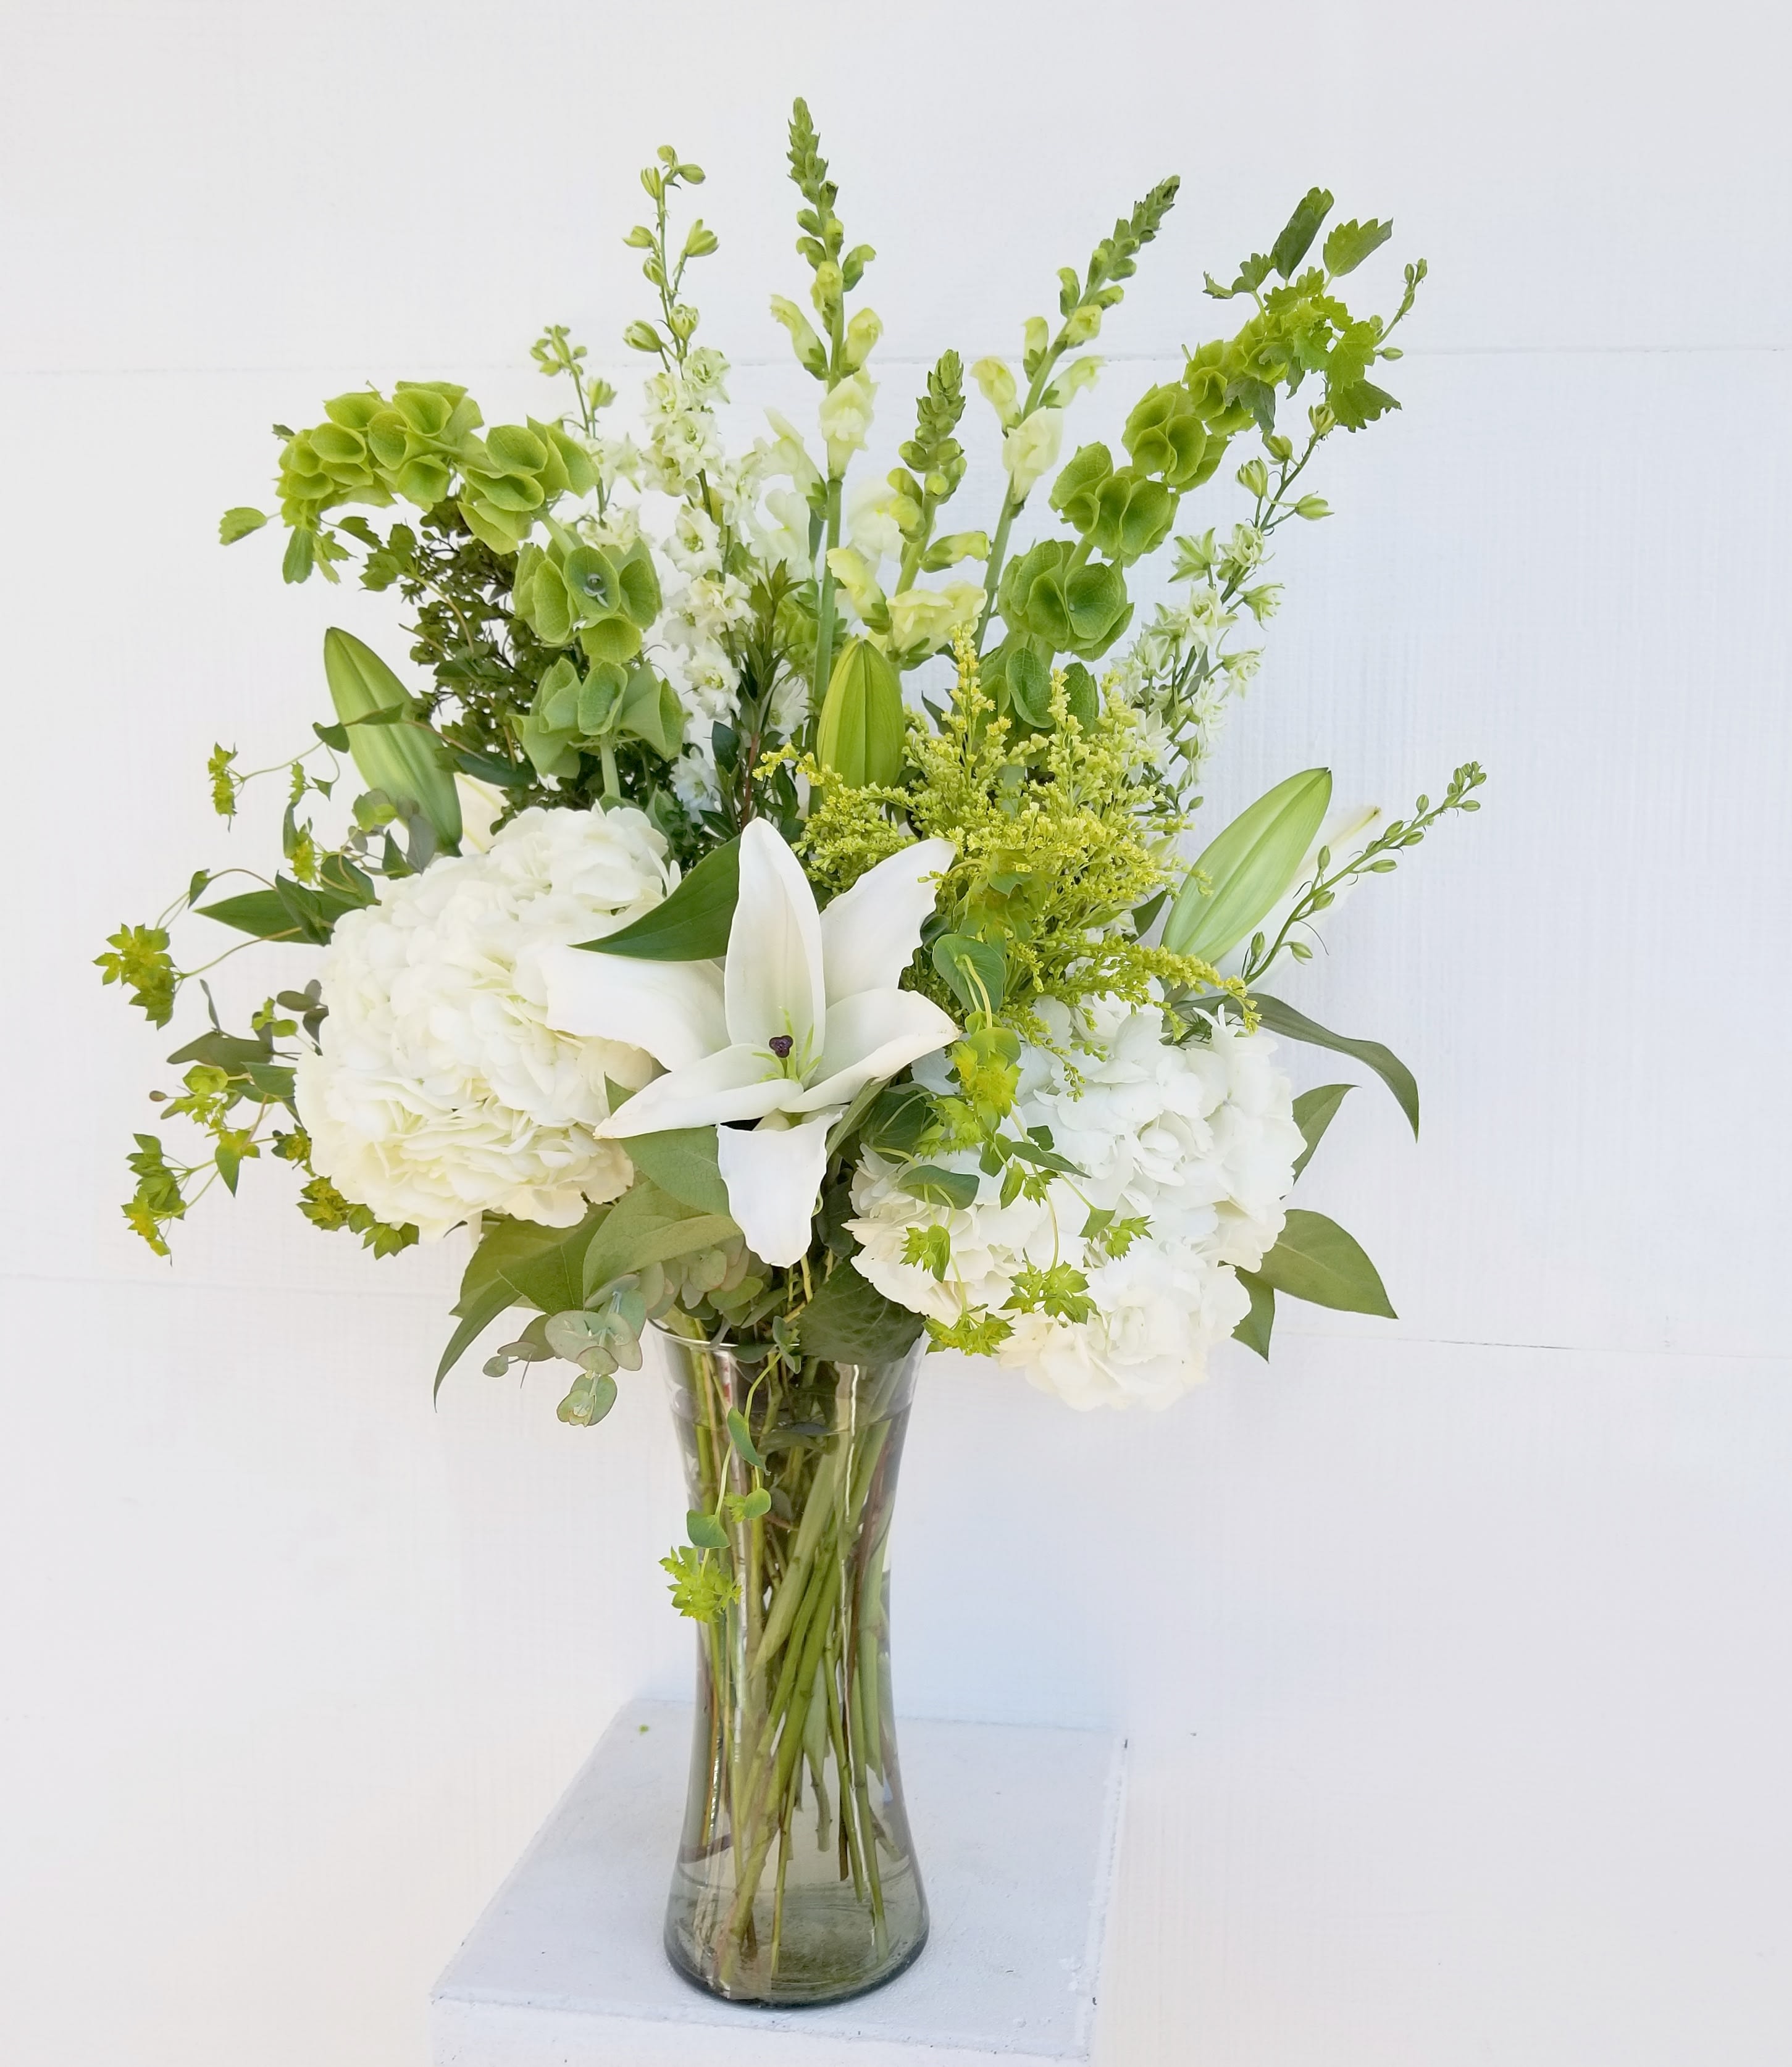 Divine meadow - Tall and natural flow in this open and meadow like arrangement.   Send this fashionable gift to someone special. It’s sure to make an impression!